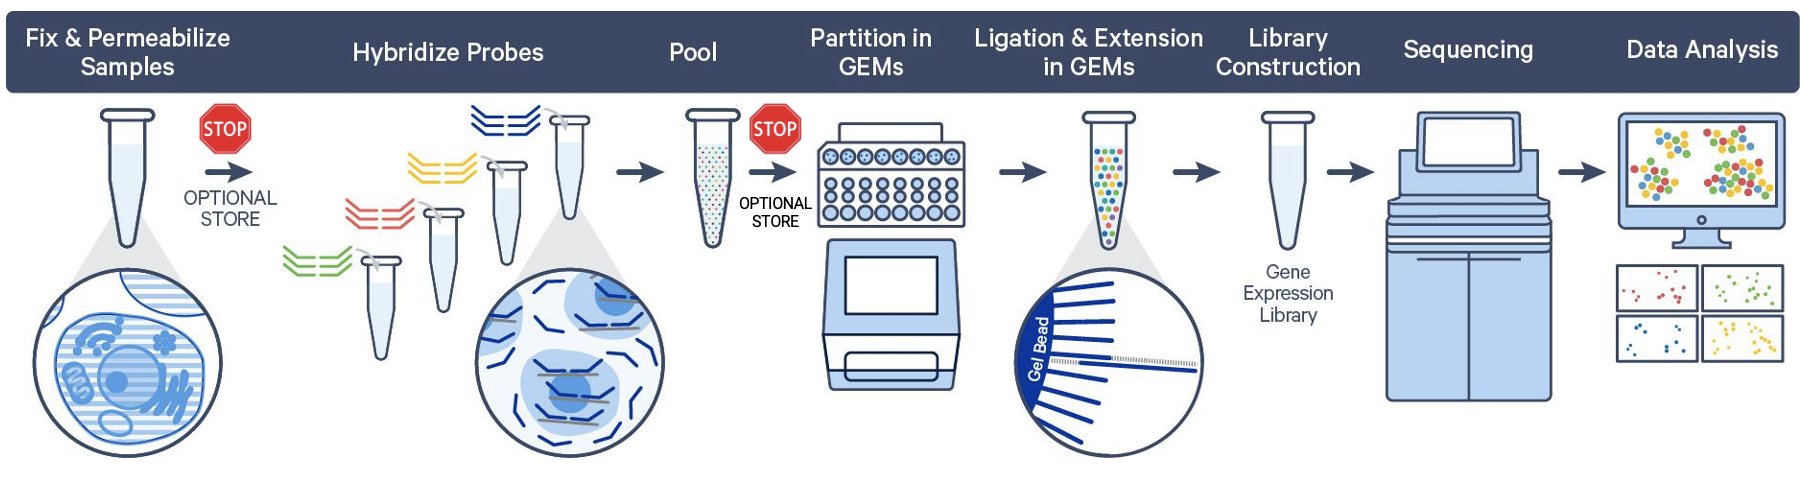 Illustration of the overall workflow for Gene Expression Flex, highlighting optional stopping points after sample fixation and after probe hybridization.